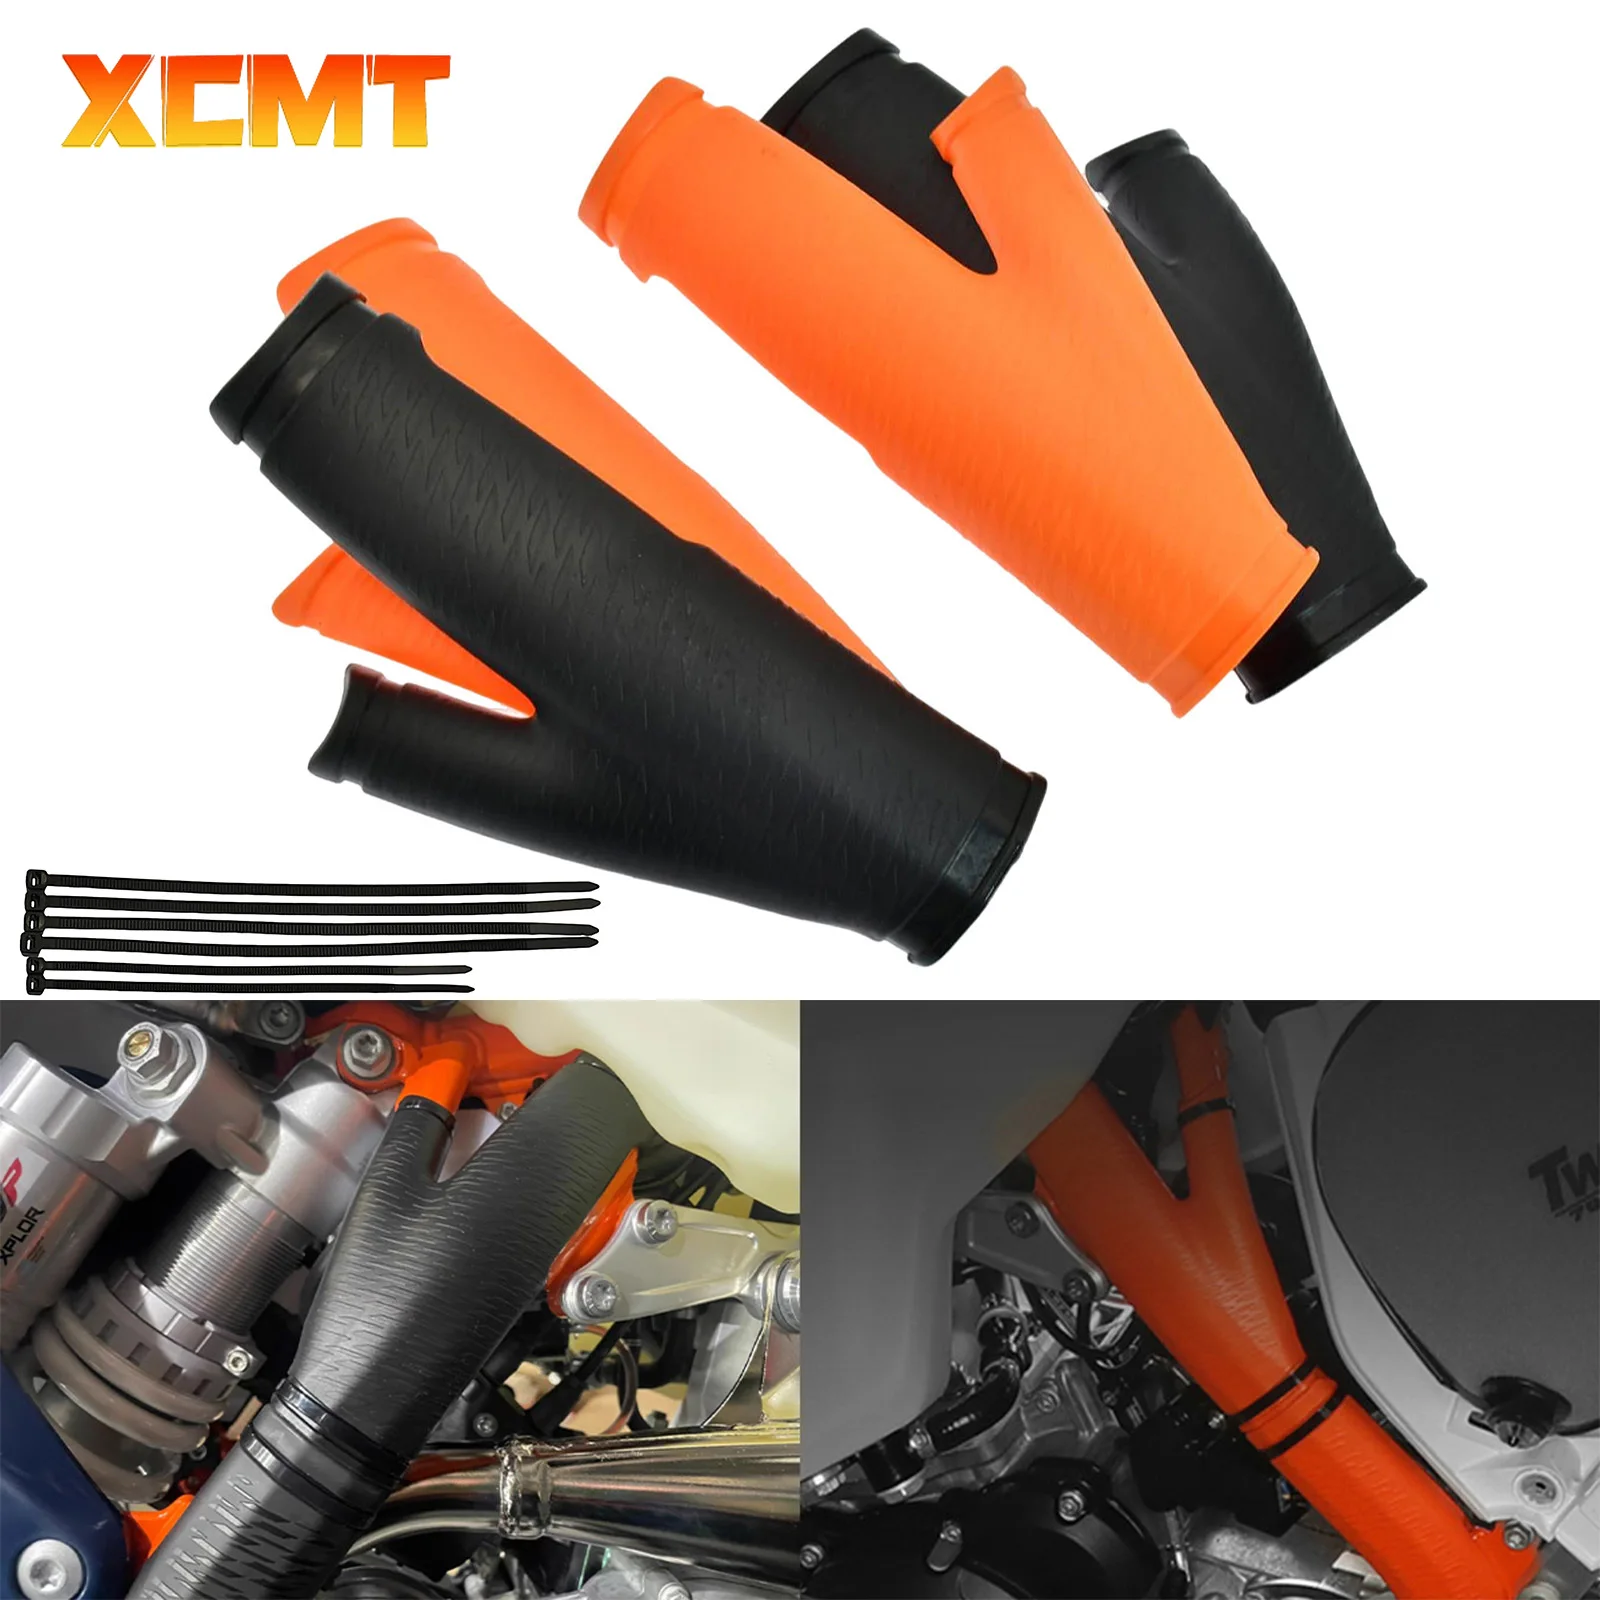 

Motorcycle Frame Cover Guards Protector For KTM EXC EXC-F SX SX-F XC XC-FXC-W XCF-W 125-500 Enduro Dirt Pit Bike 2019-2022